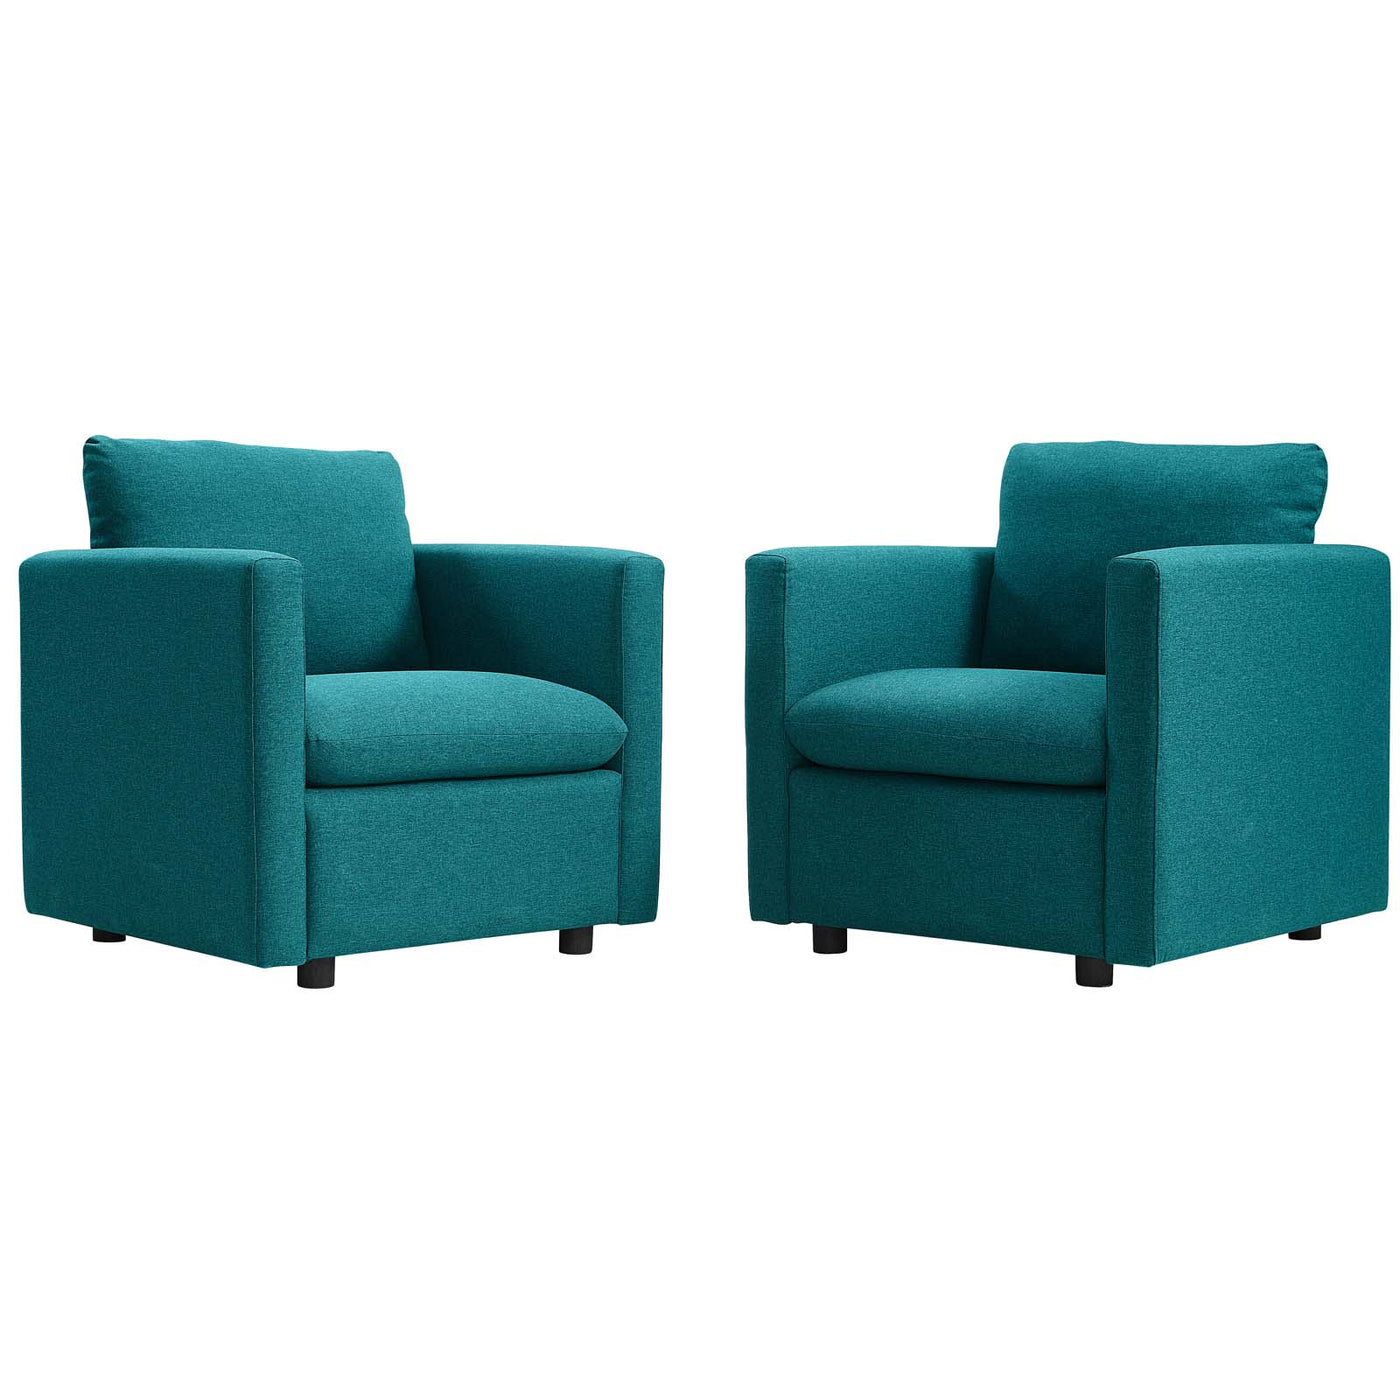 Activate Upholstered Fabric Armchair Set of 2